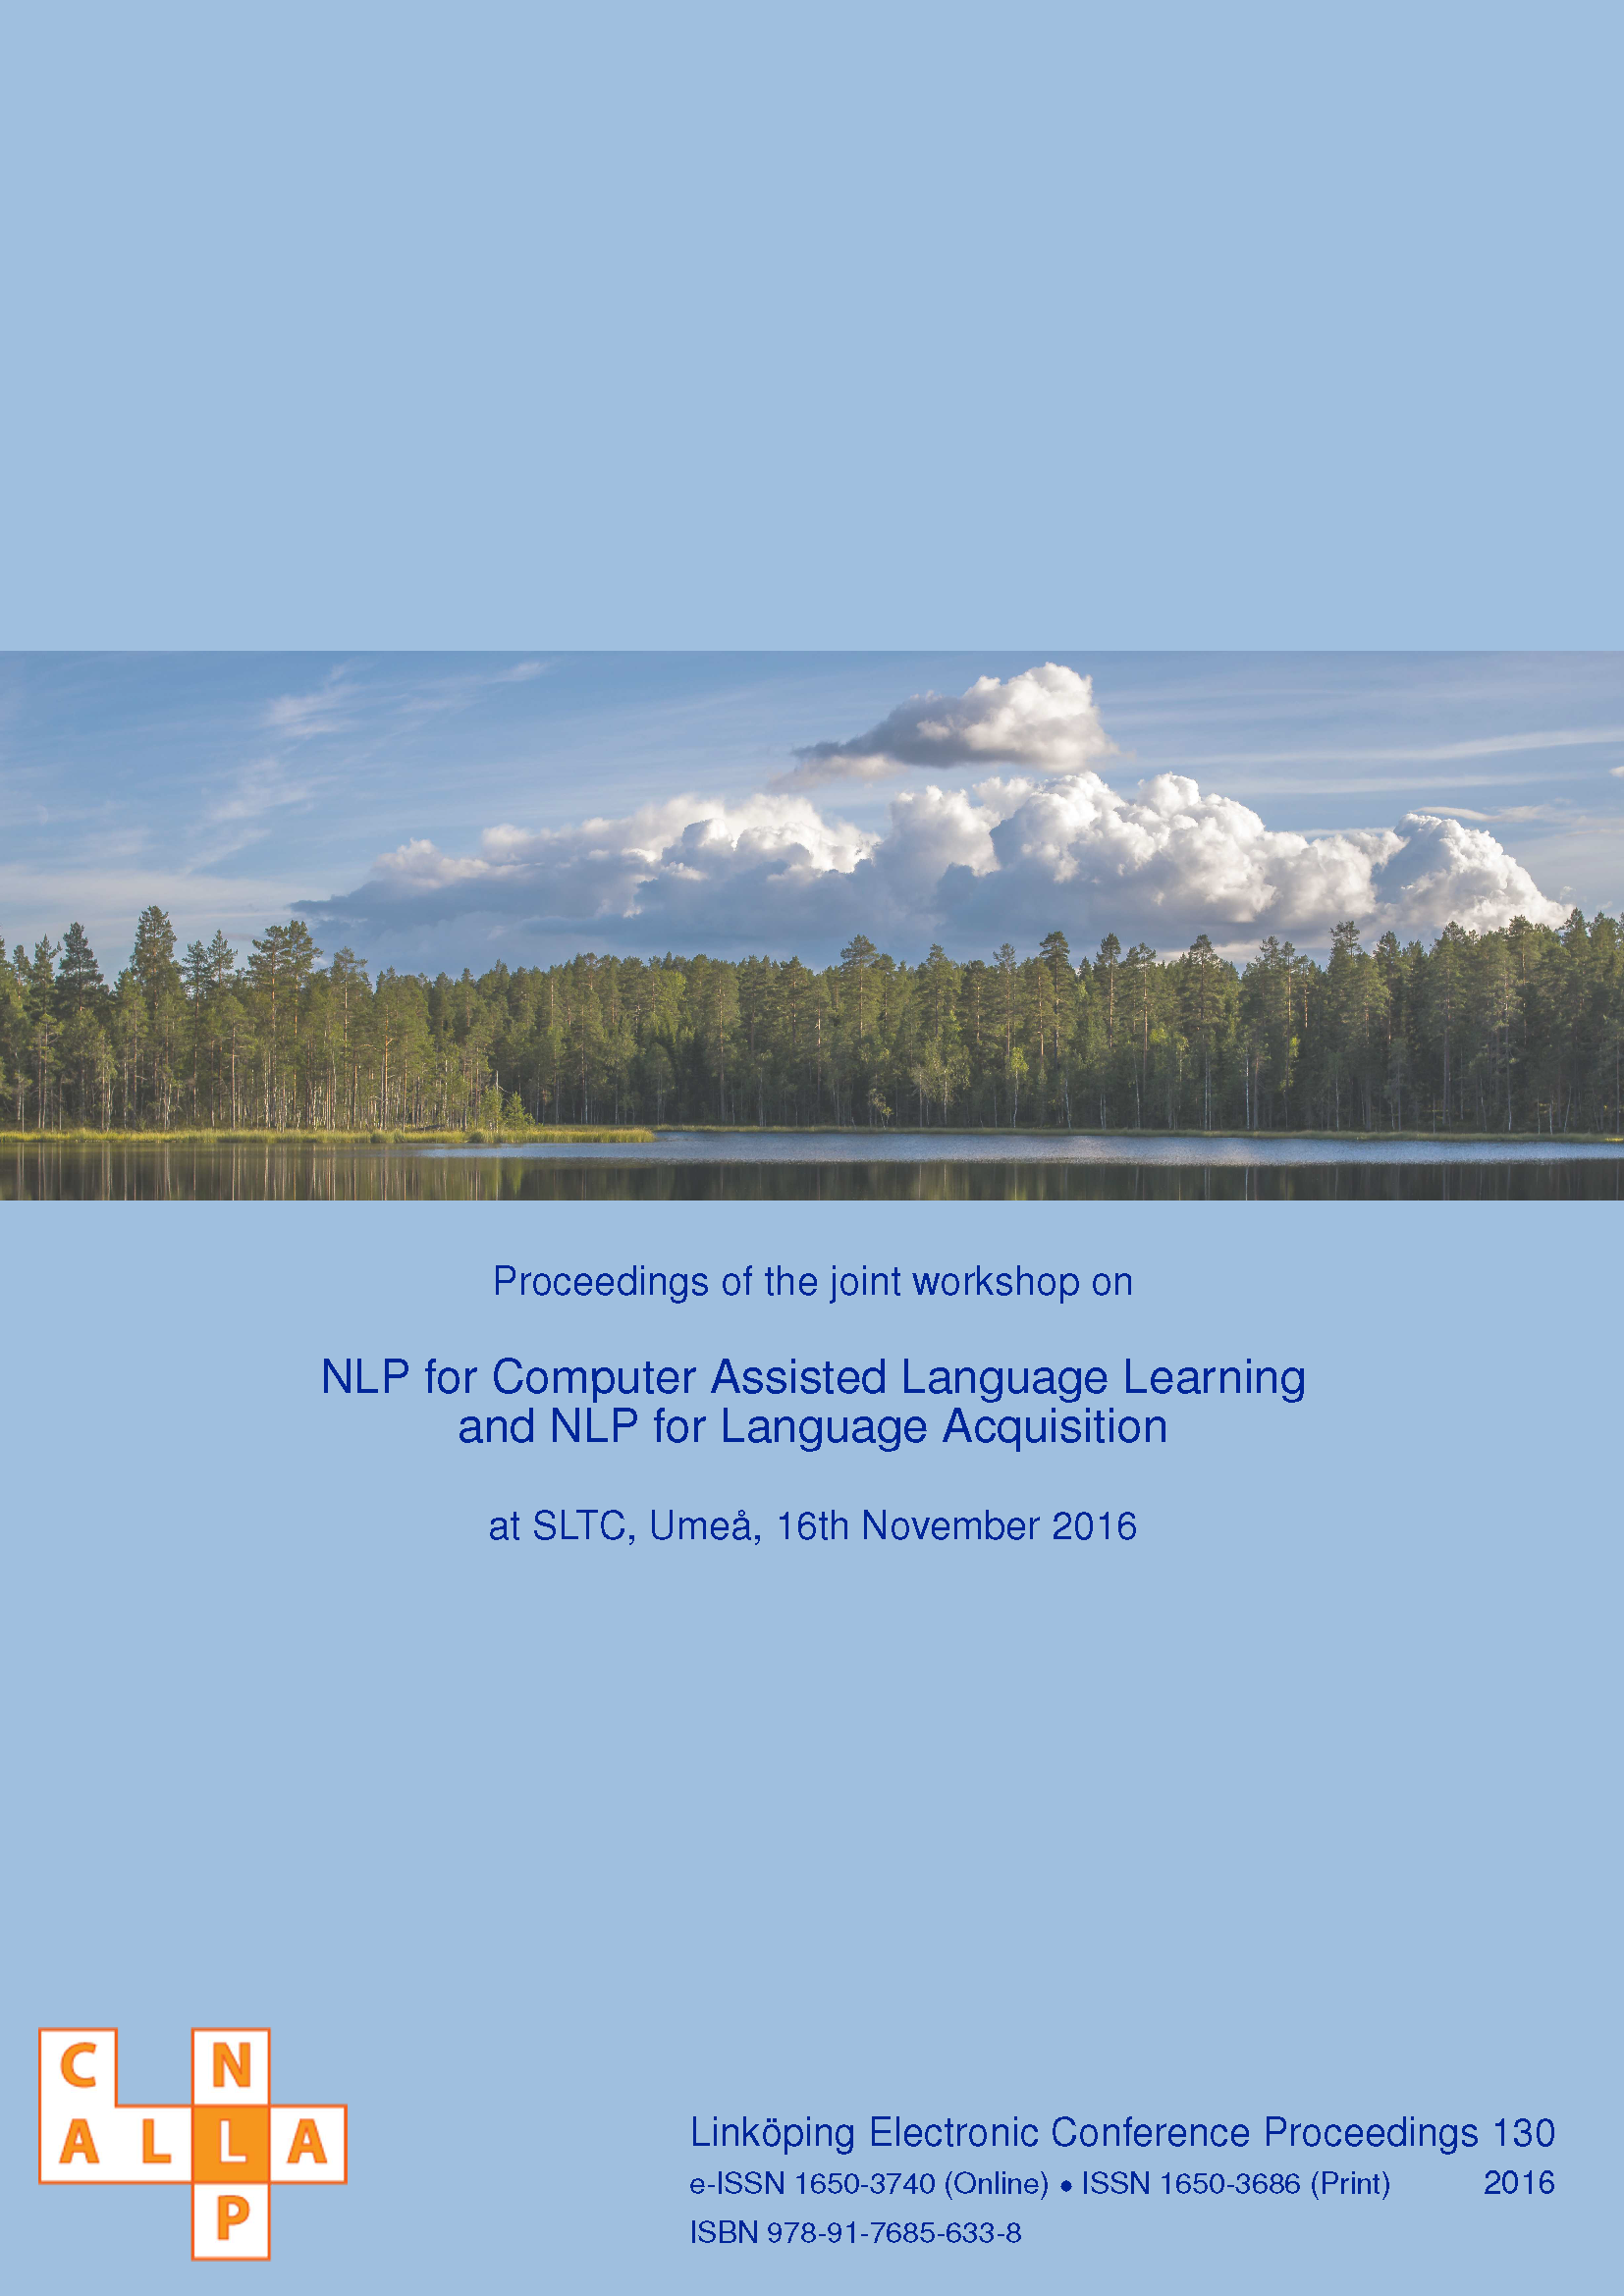 					View Proceedings of the joint workshop on NLP for Computer Assisted Language Learning and NLP for Language Acquisition at SLTC, Umeå, 16th November 2016
				